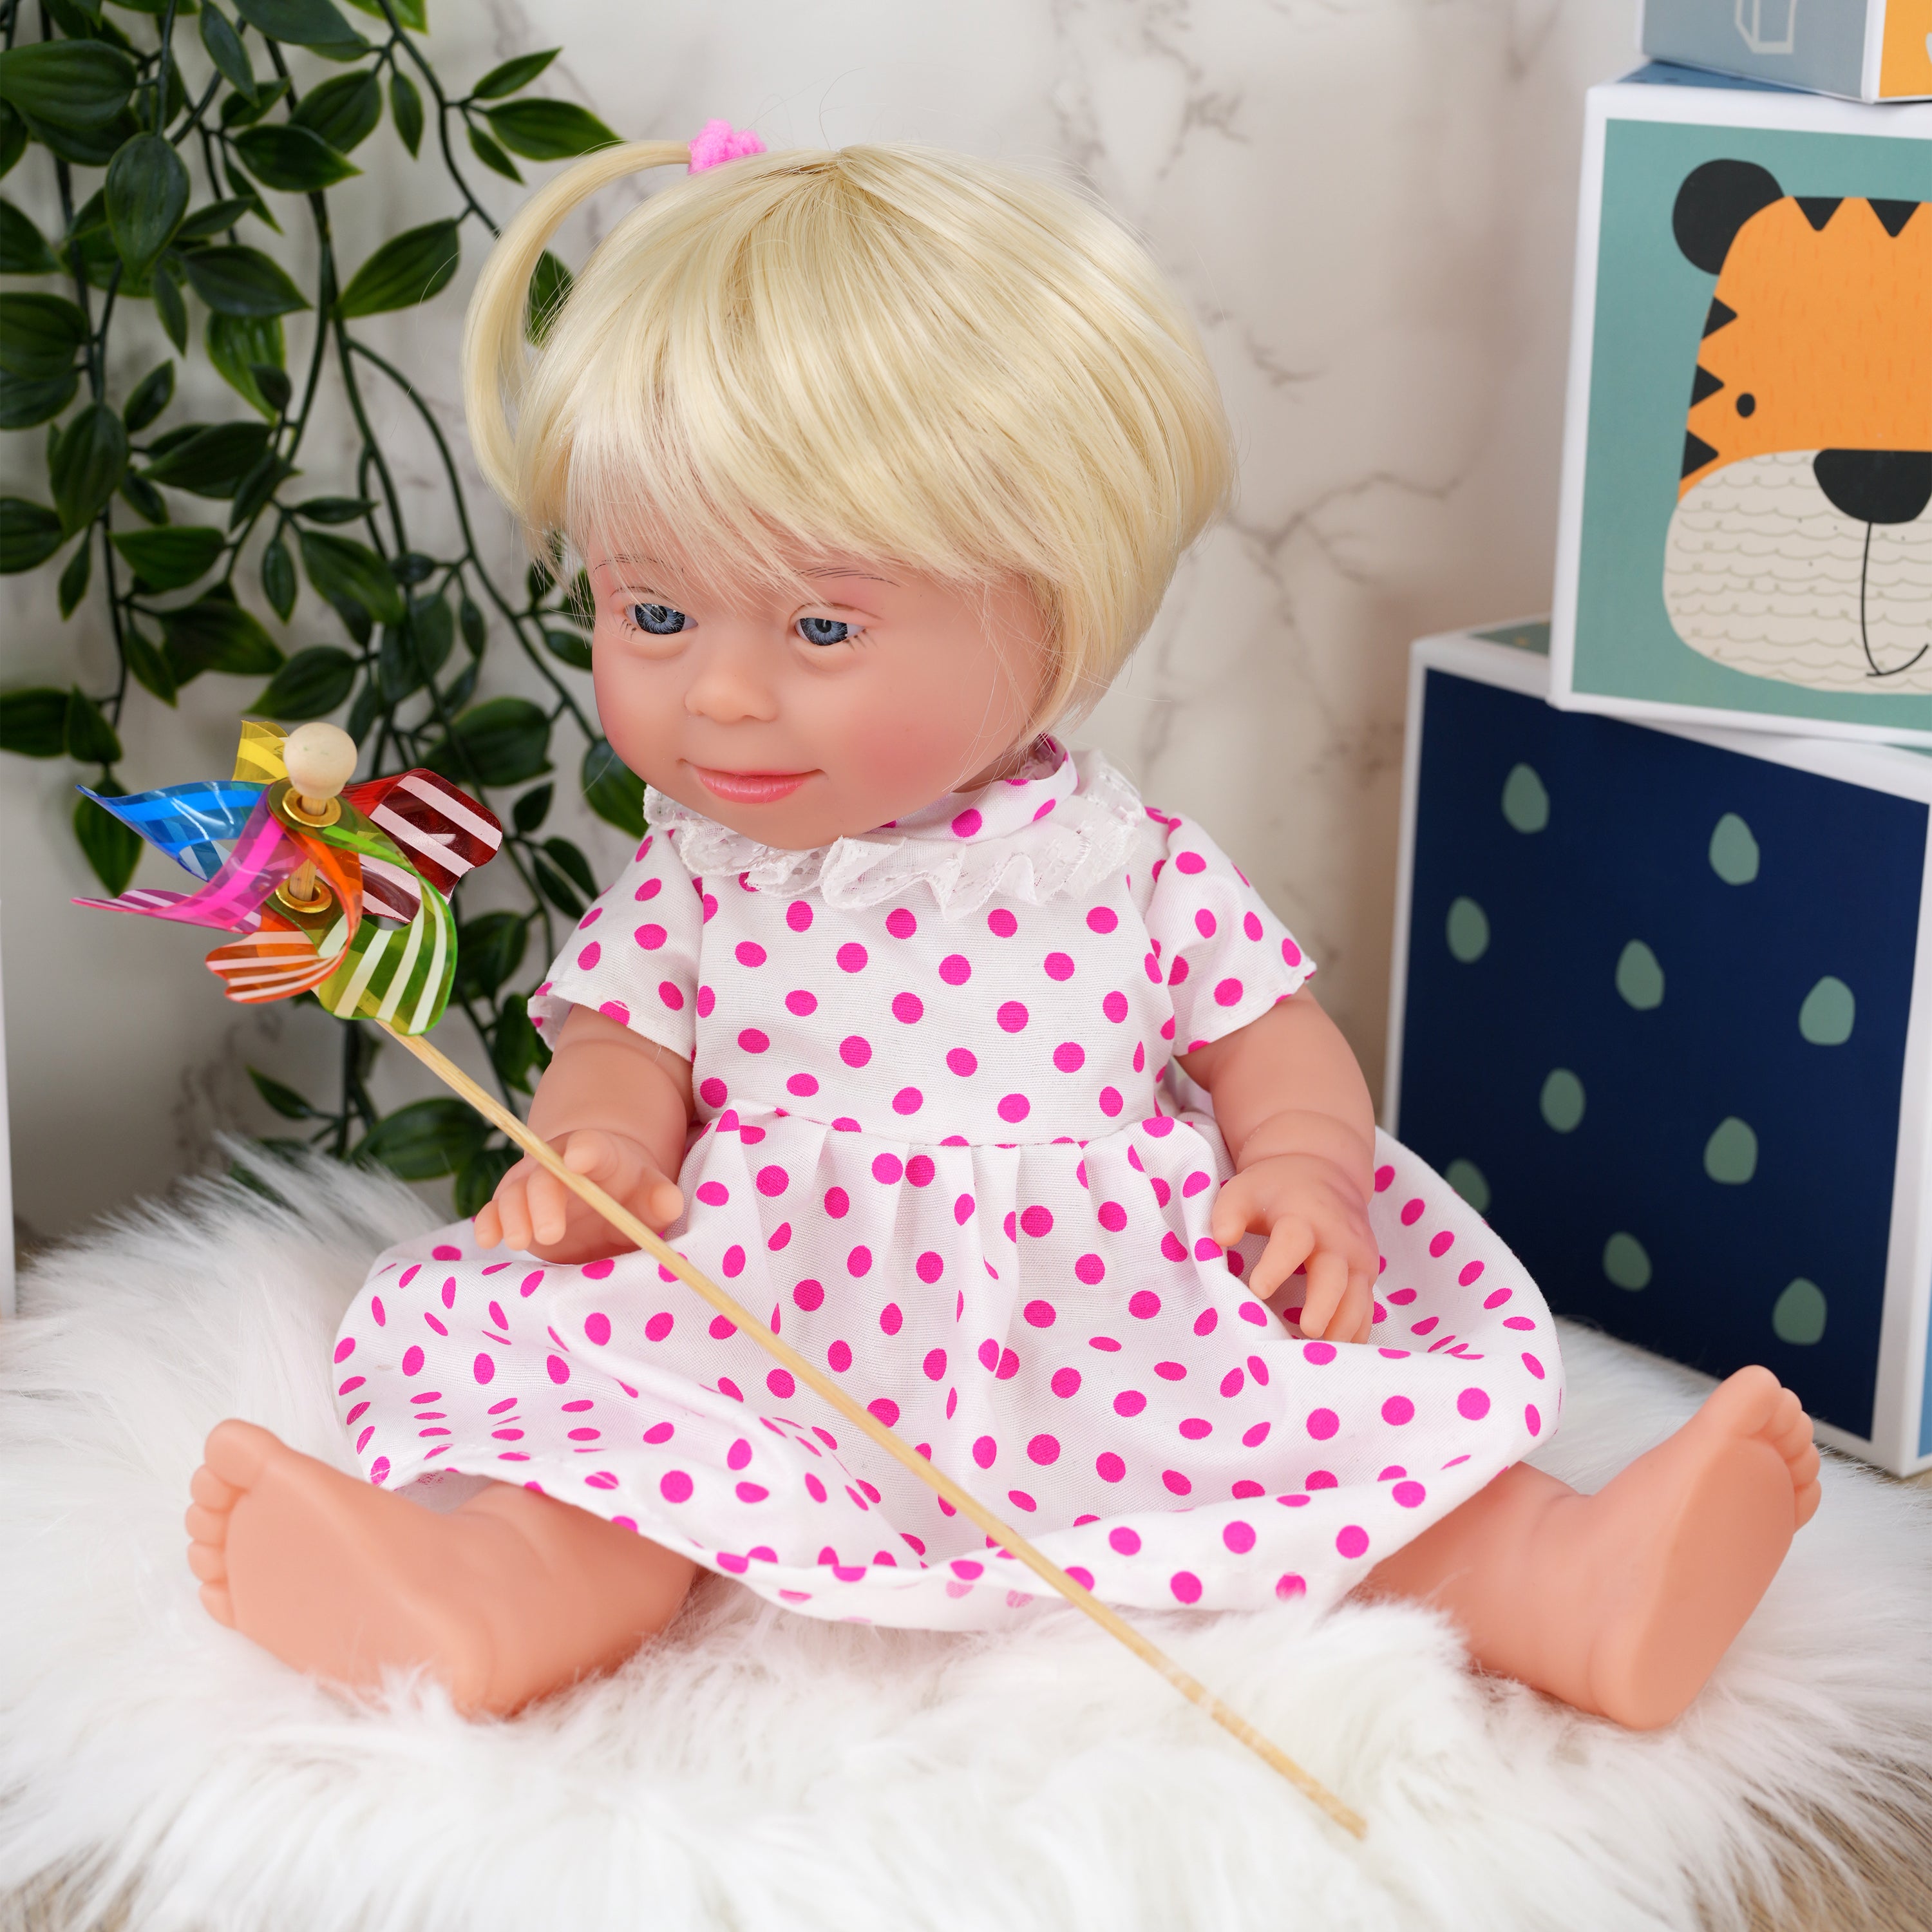 Blonde Baby Girl Dolls with Down Syndrome BiBi Doll - The Magic Toy Shop